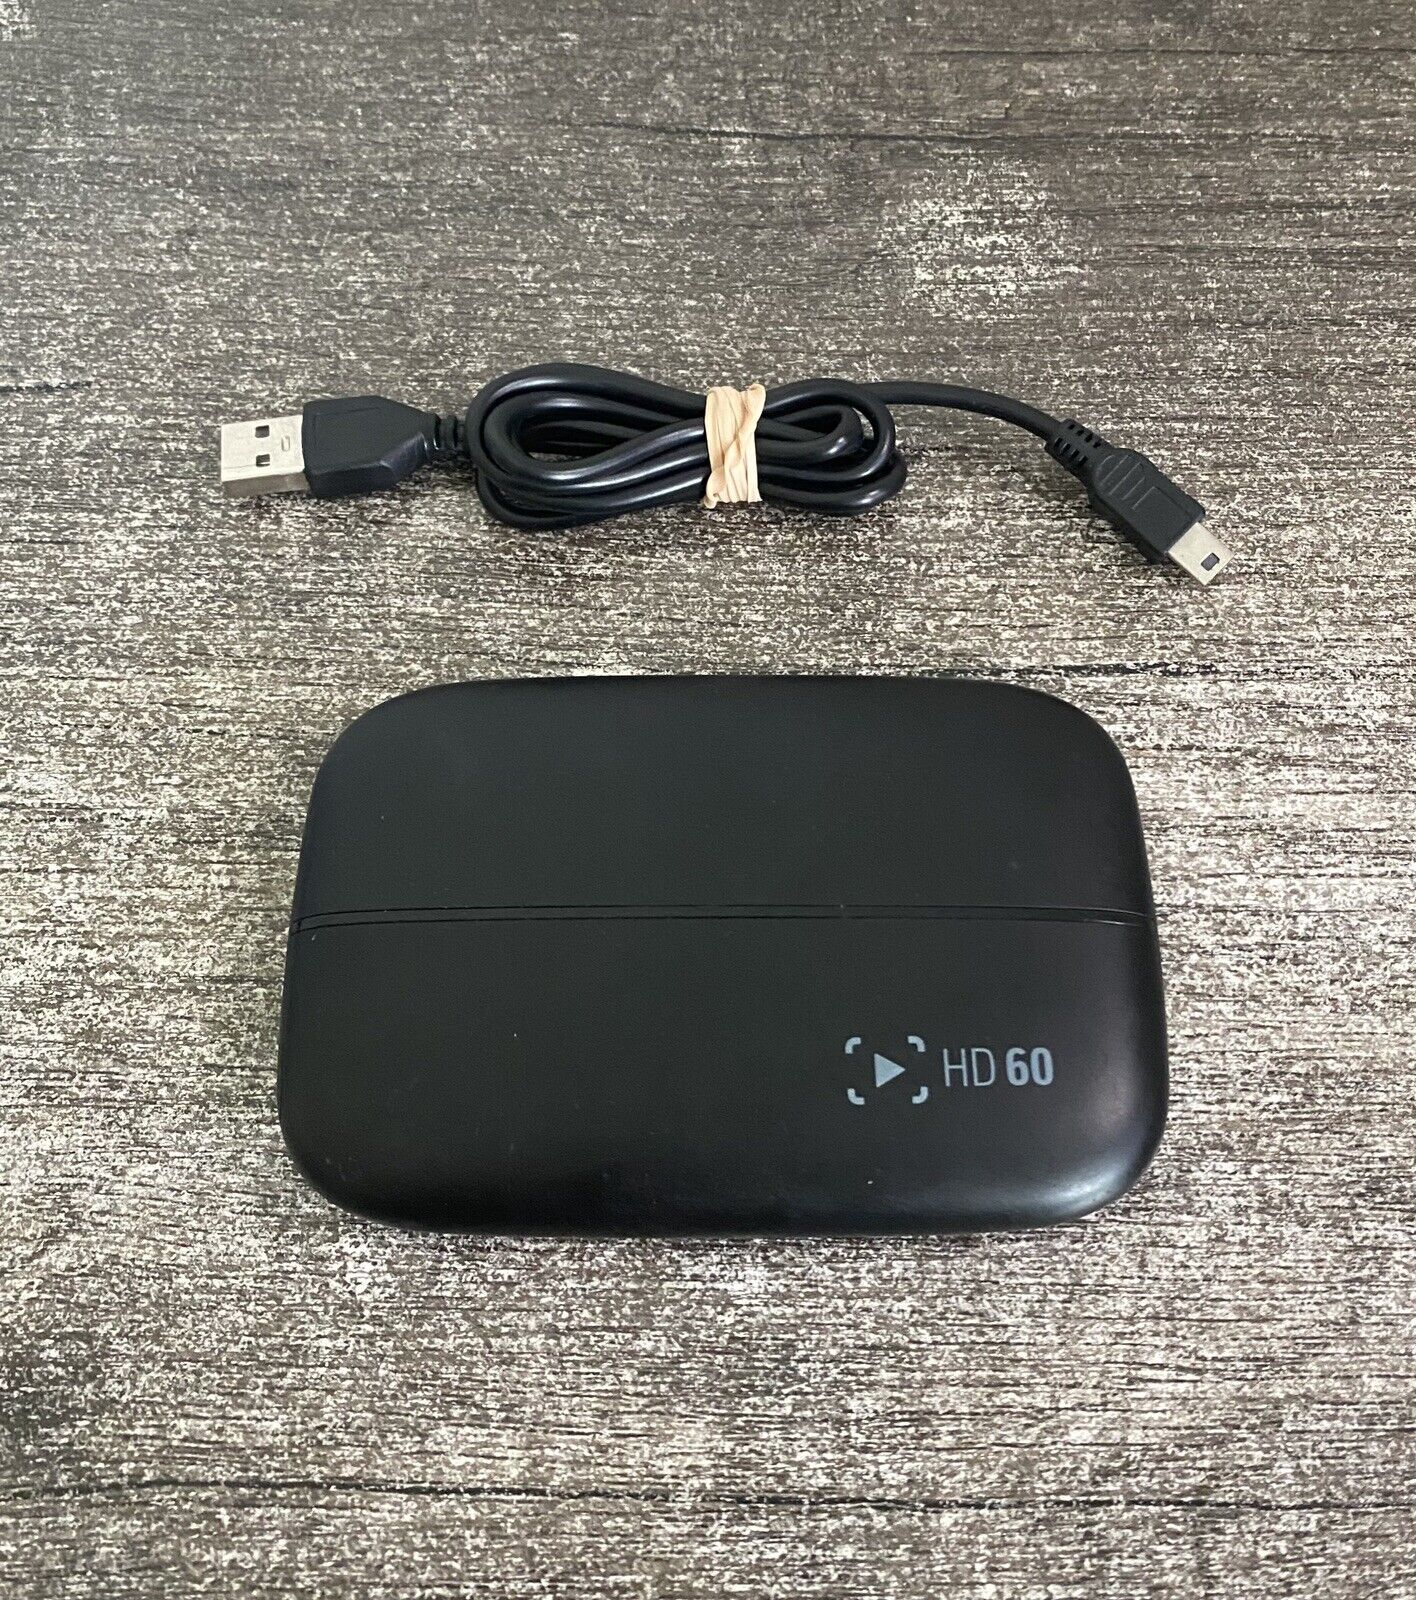 Elgato Game Capture HD60 With USB Cable - Tested